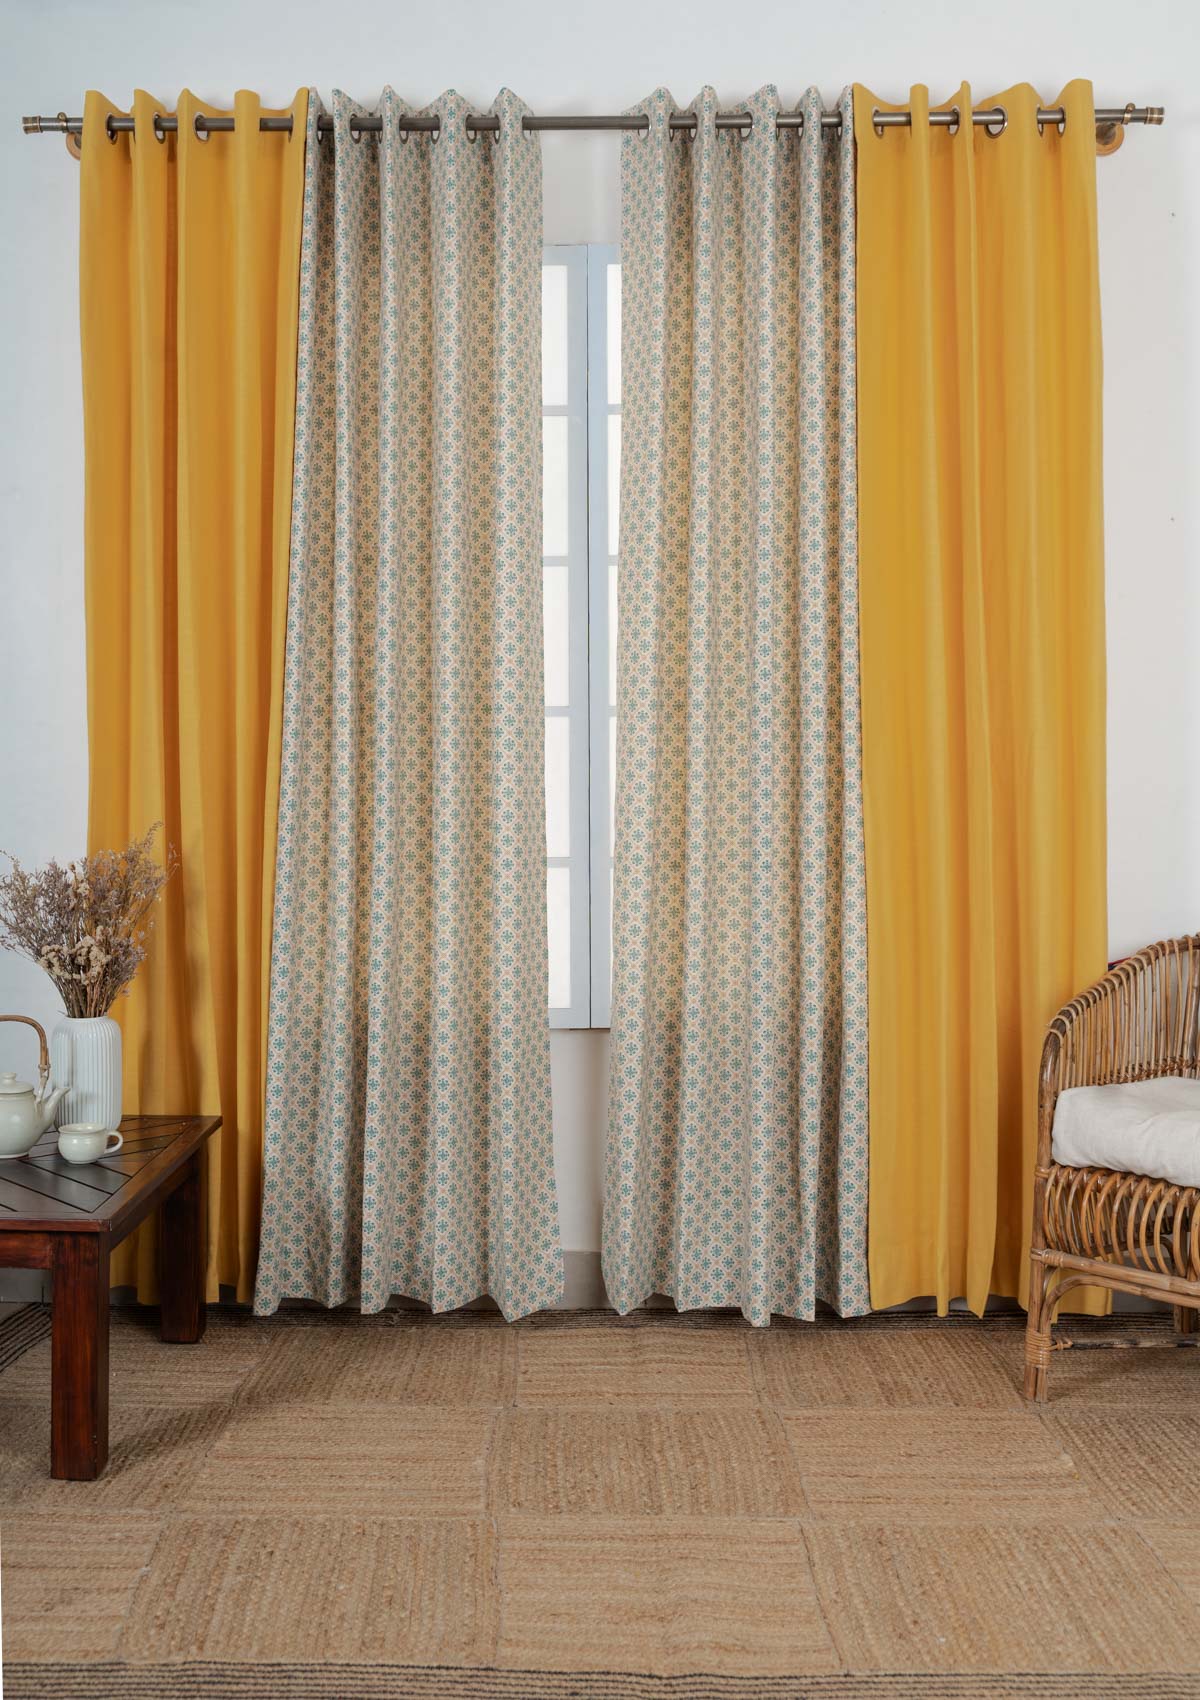 Solid Mustard with Yura geometric print 100% cotton curtain for living room - Set of 4